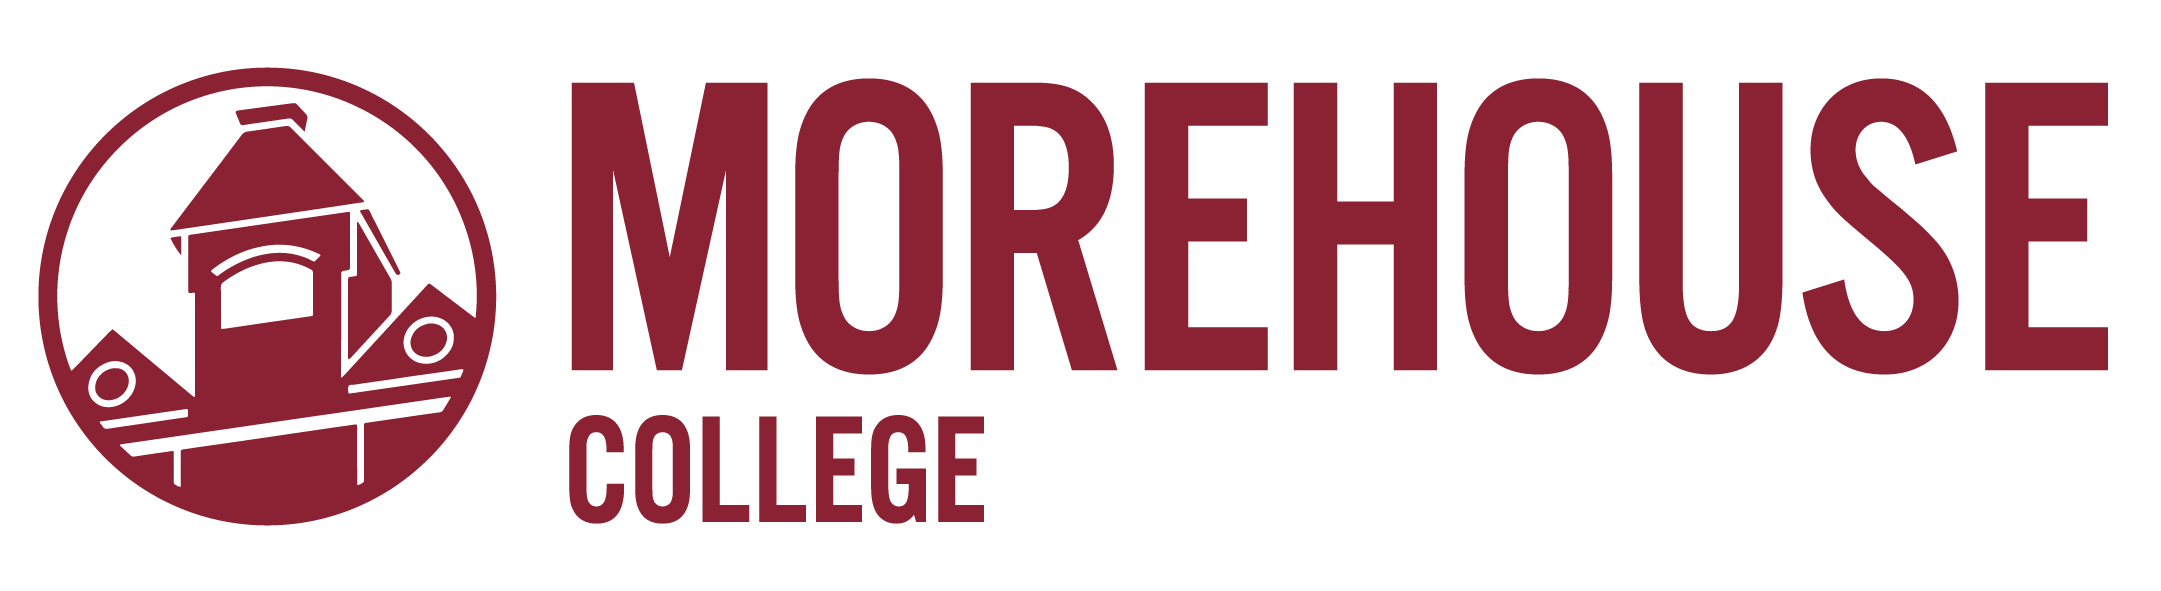 Morehouse Collegeロゴ